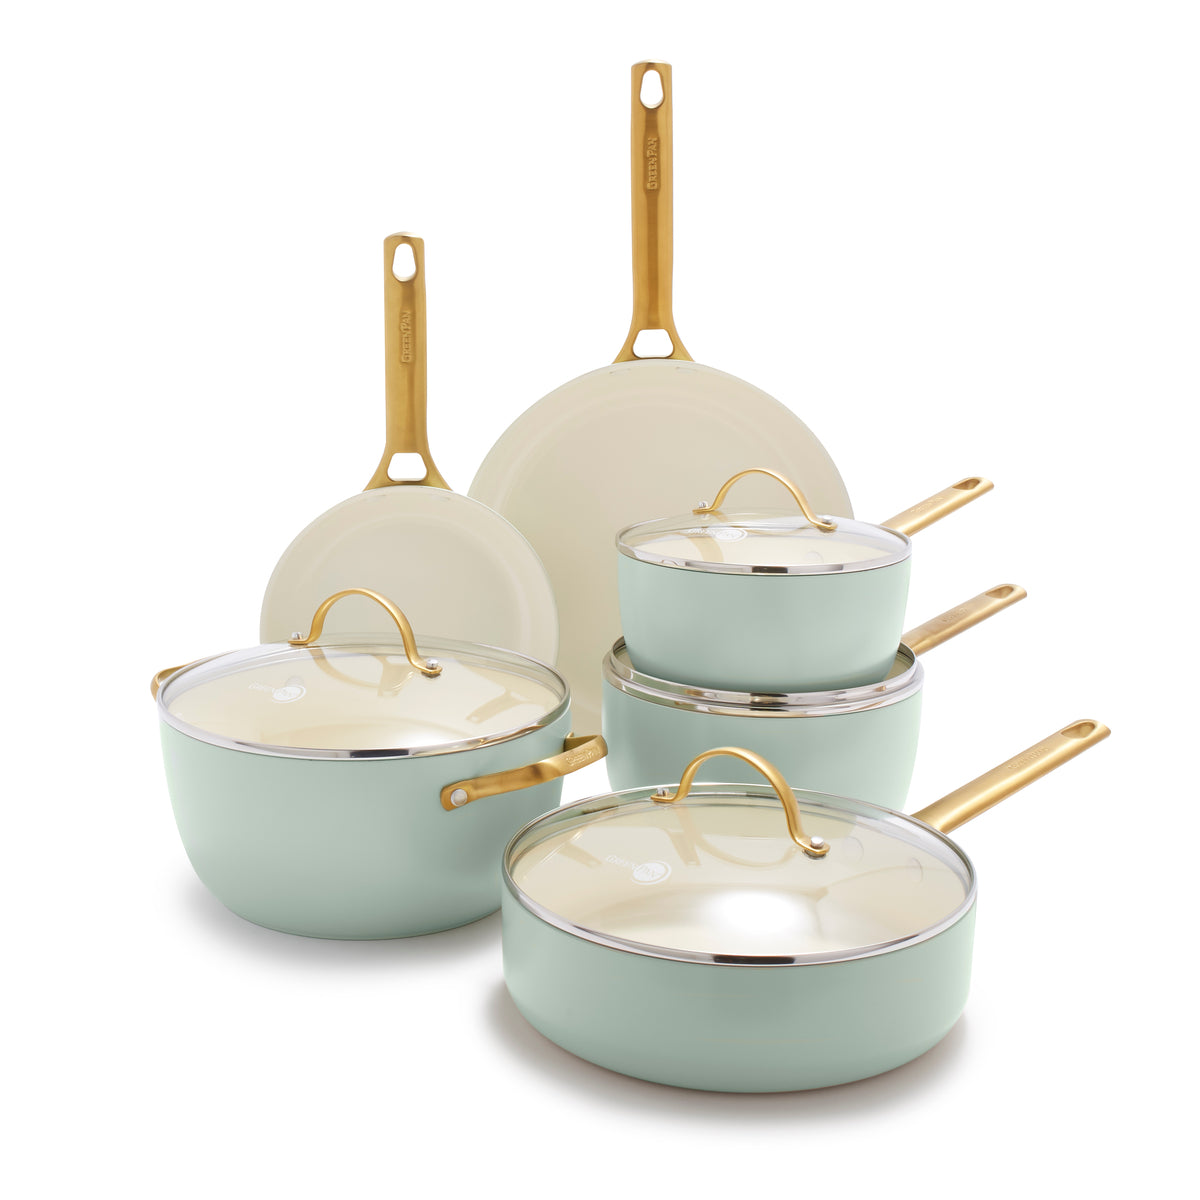 Rorence Nonstick Bakeware Set of 7 - Mint Green – Rorence Store